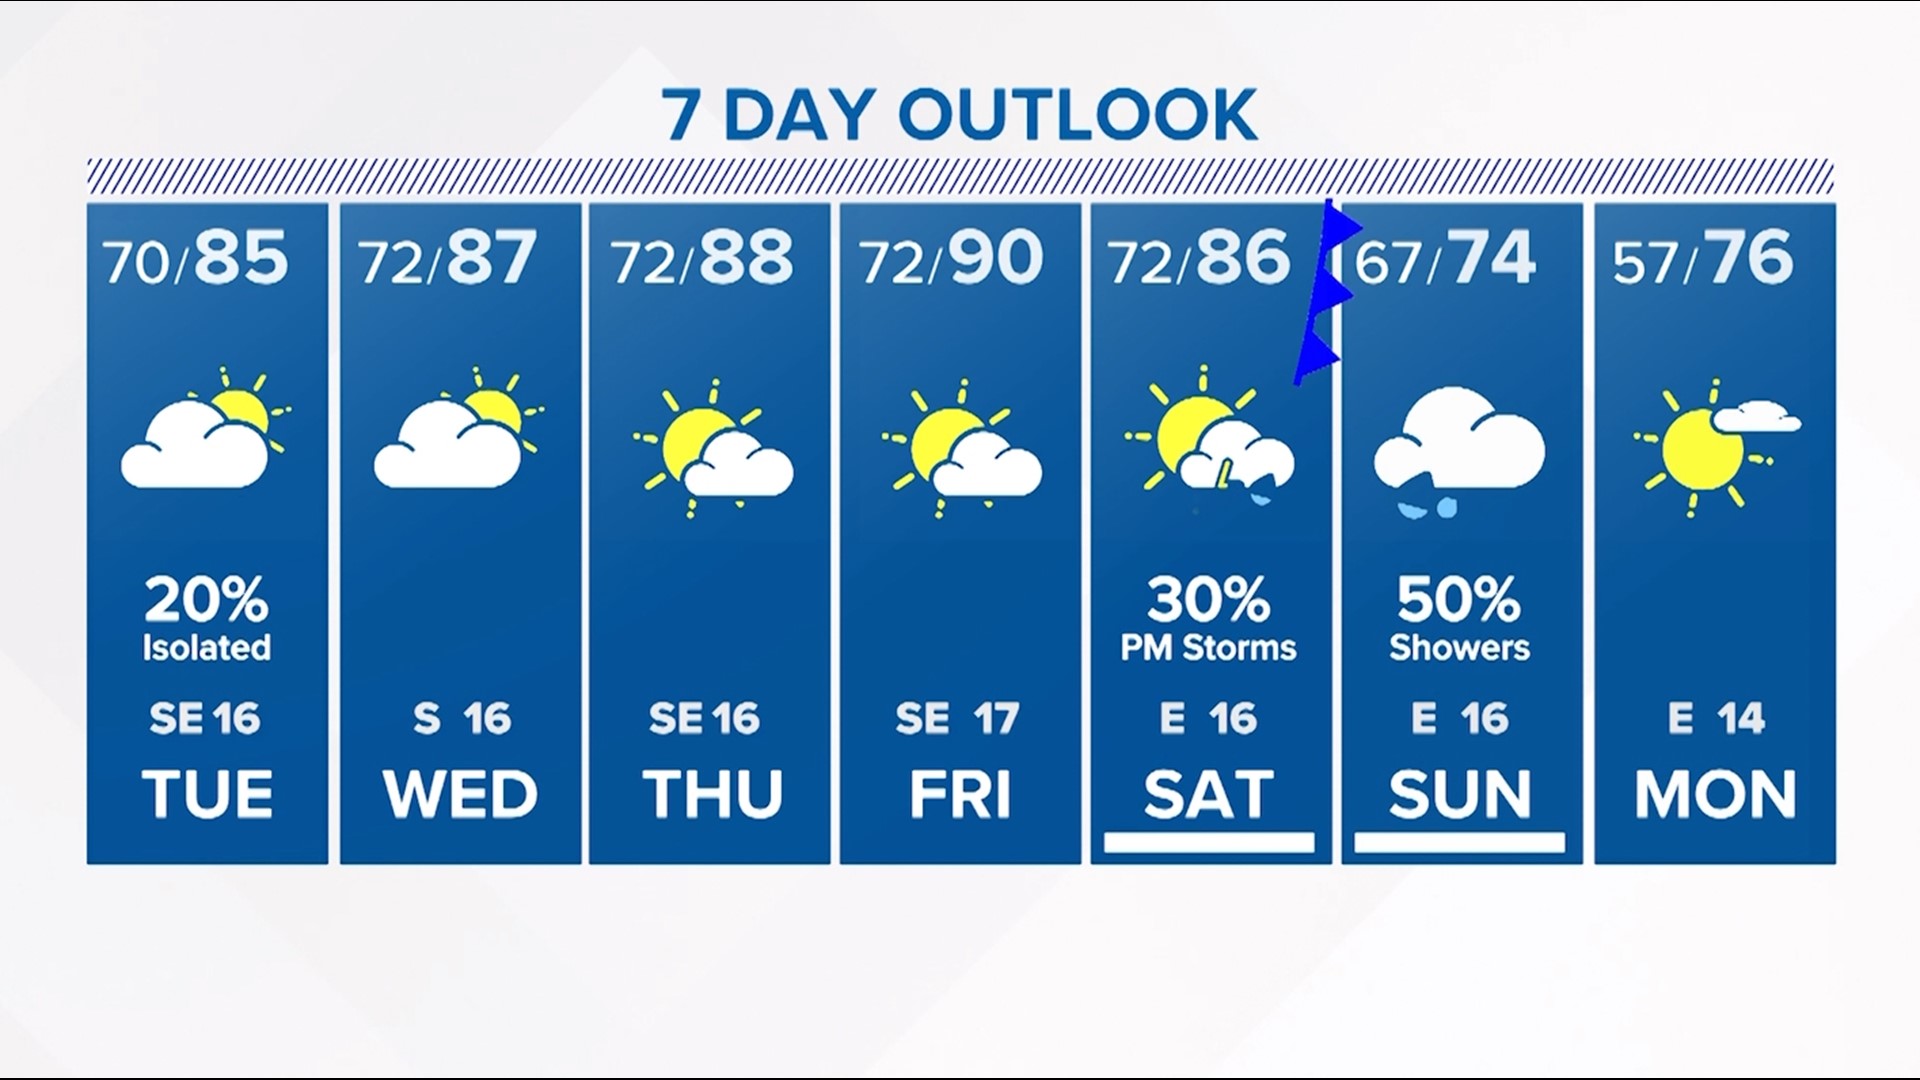 Afternoon temperatures are likely to hit 90 by the end of the week.